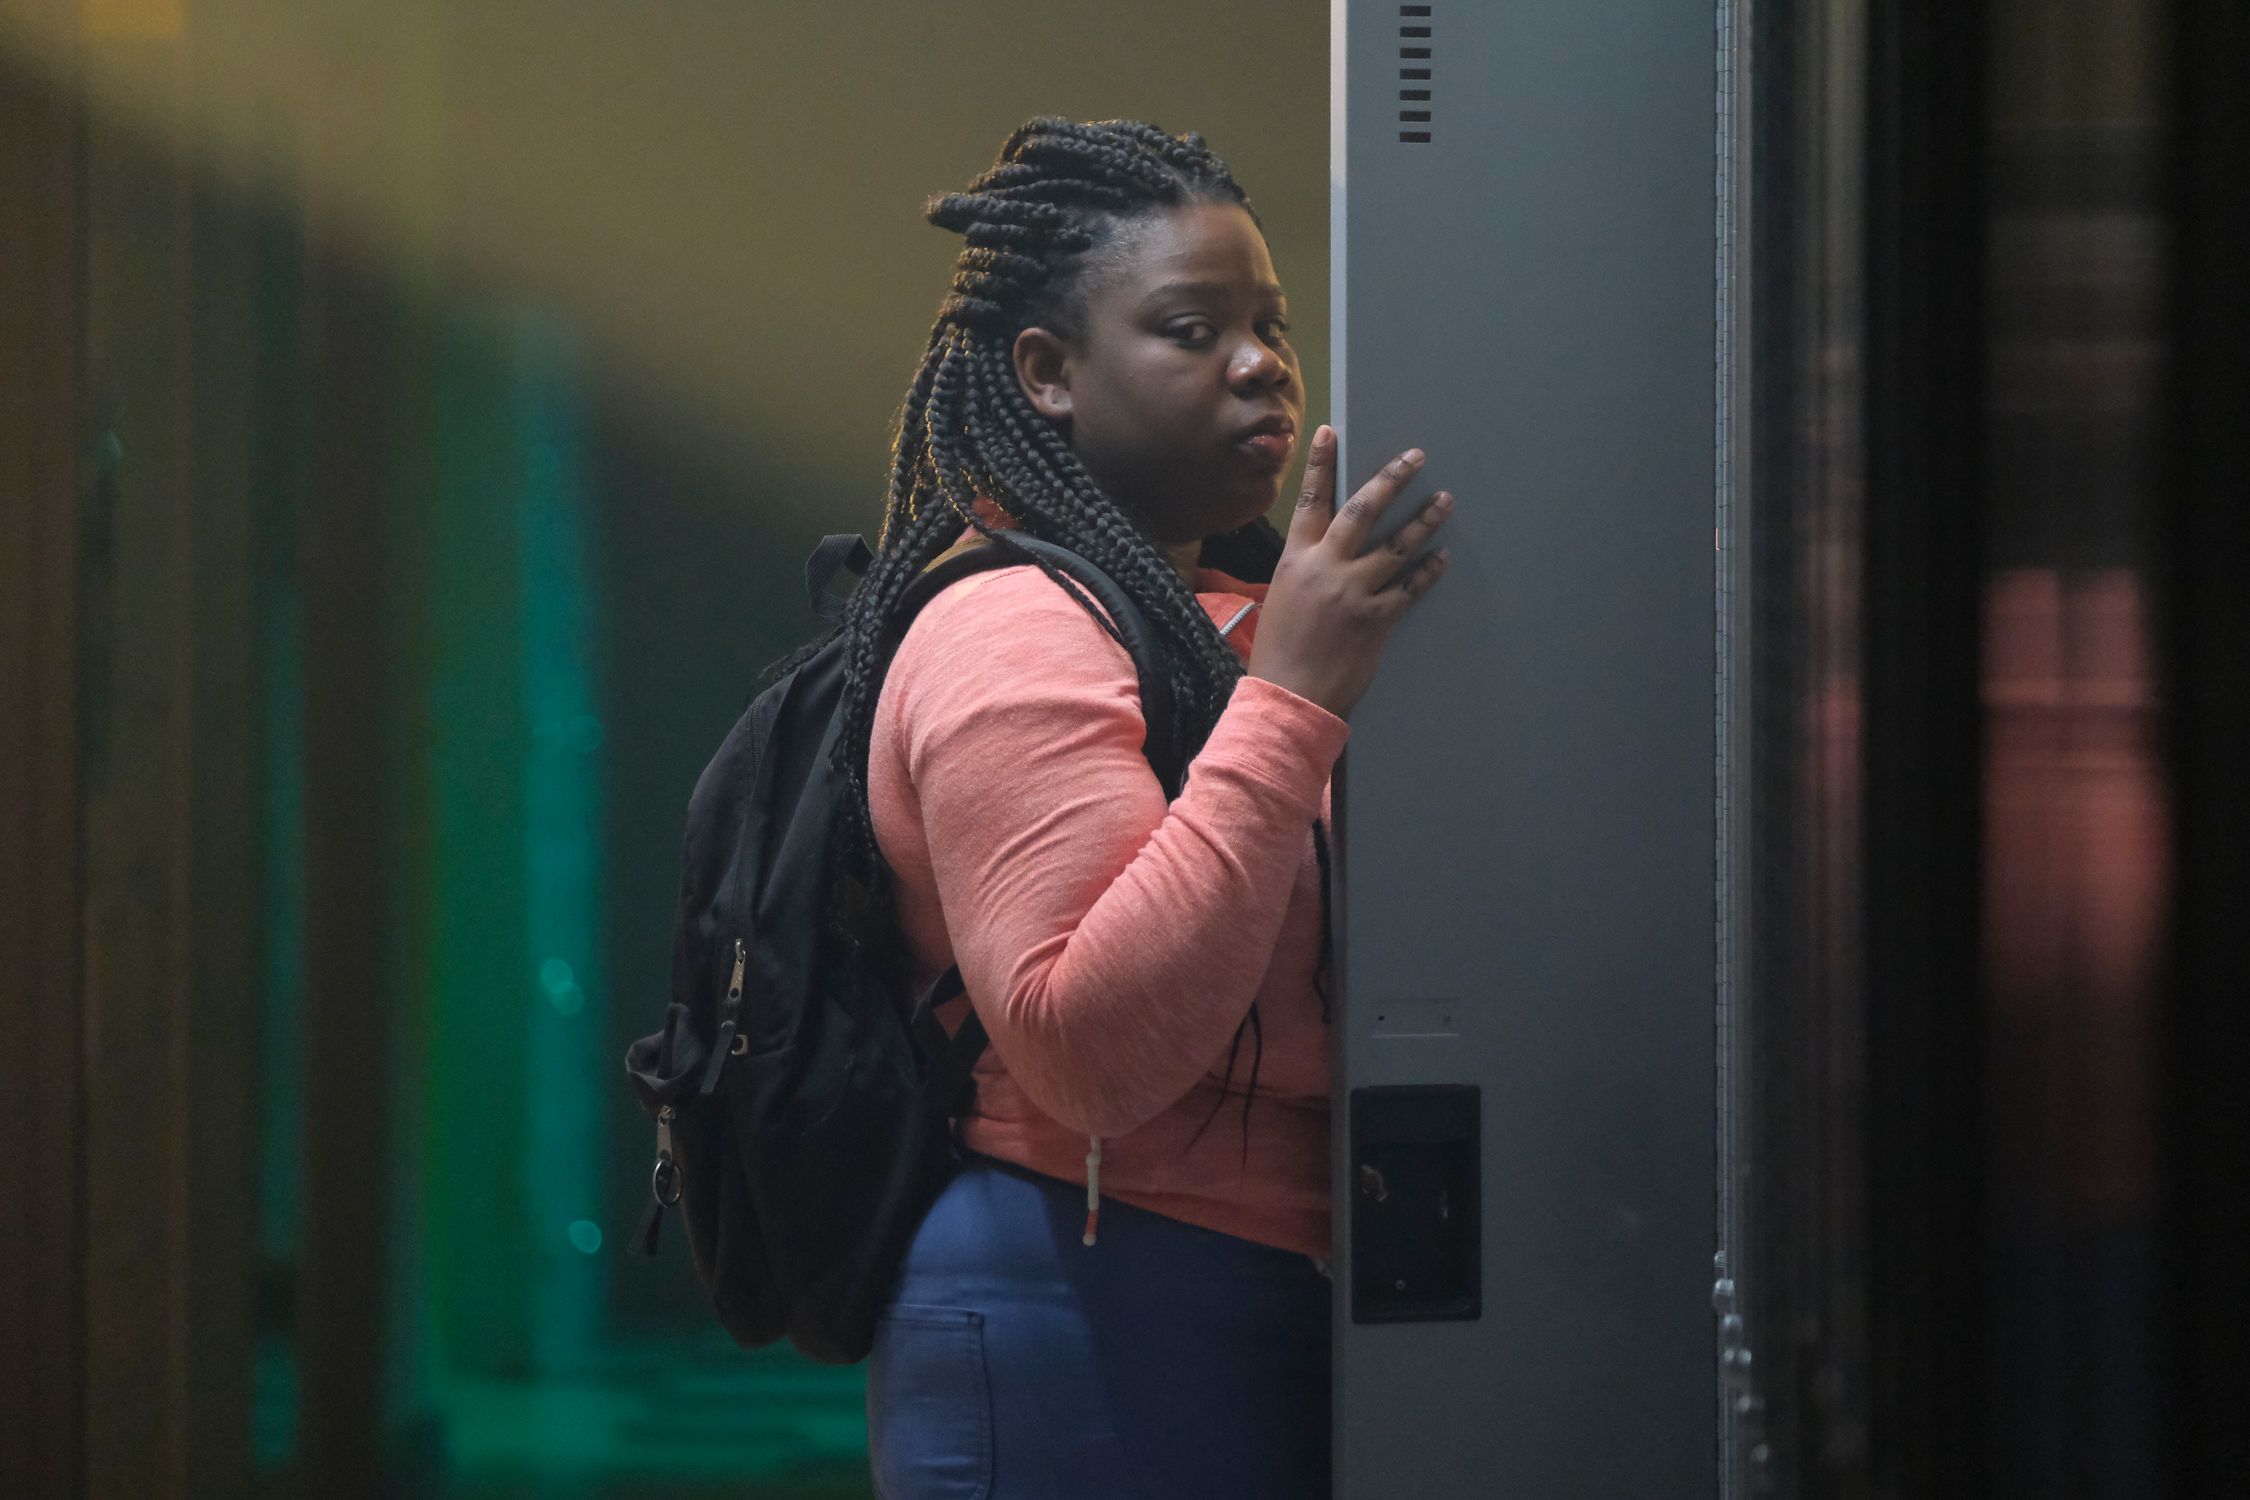 A person with braided hair is standing at a locker, looking over their shoulder with a contemplative expression. They are wearing casual clothing and a backpack, indicating they could be a student. The hallway in the background is blurred.